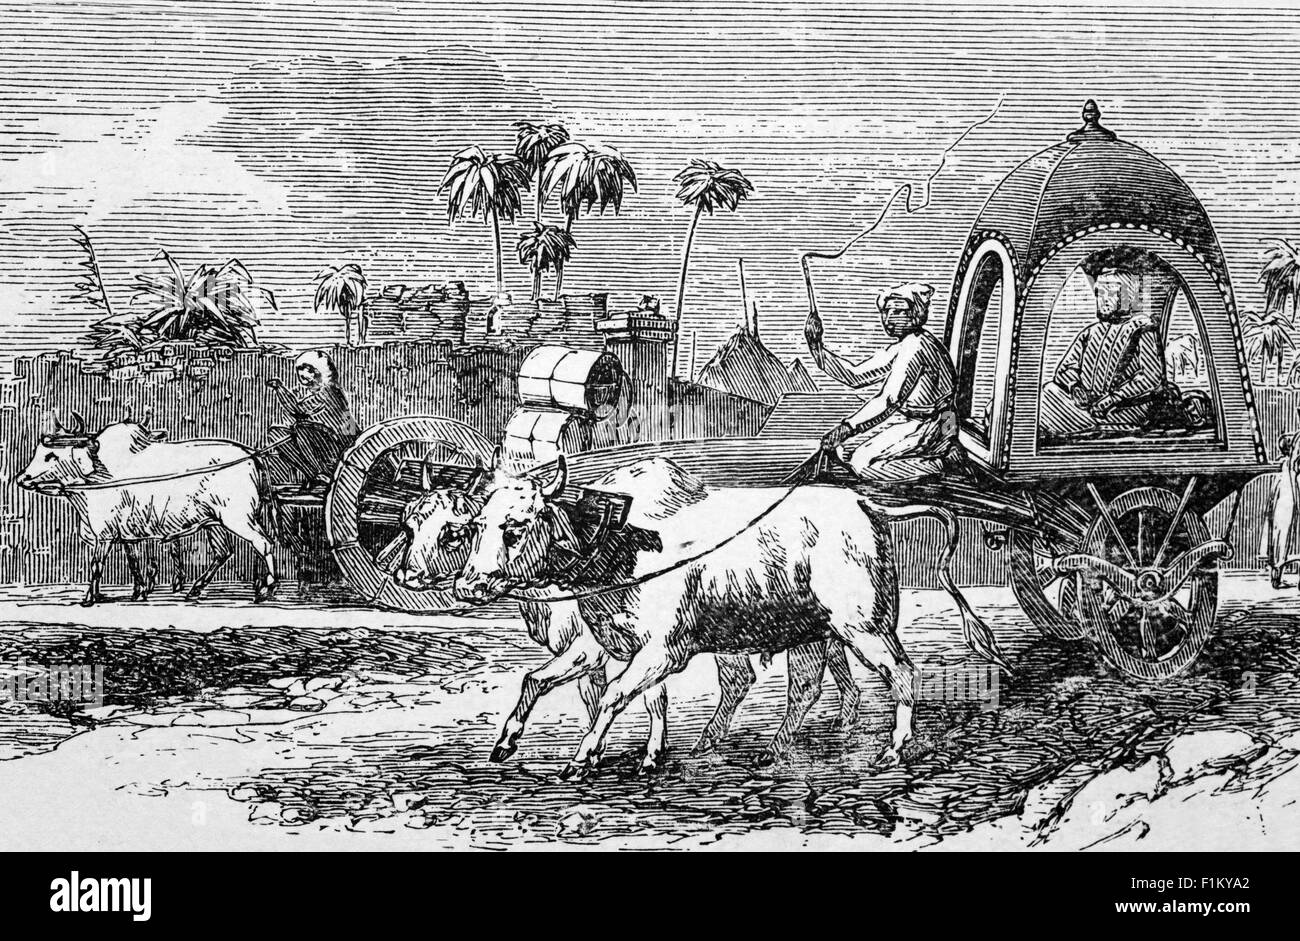 A 19th Century view of a cart drawn by oxen, Bombay (Now Mumbai), India Stock Photo